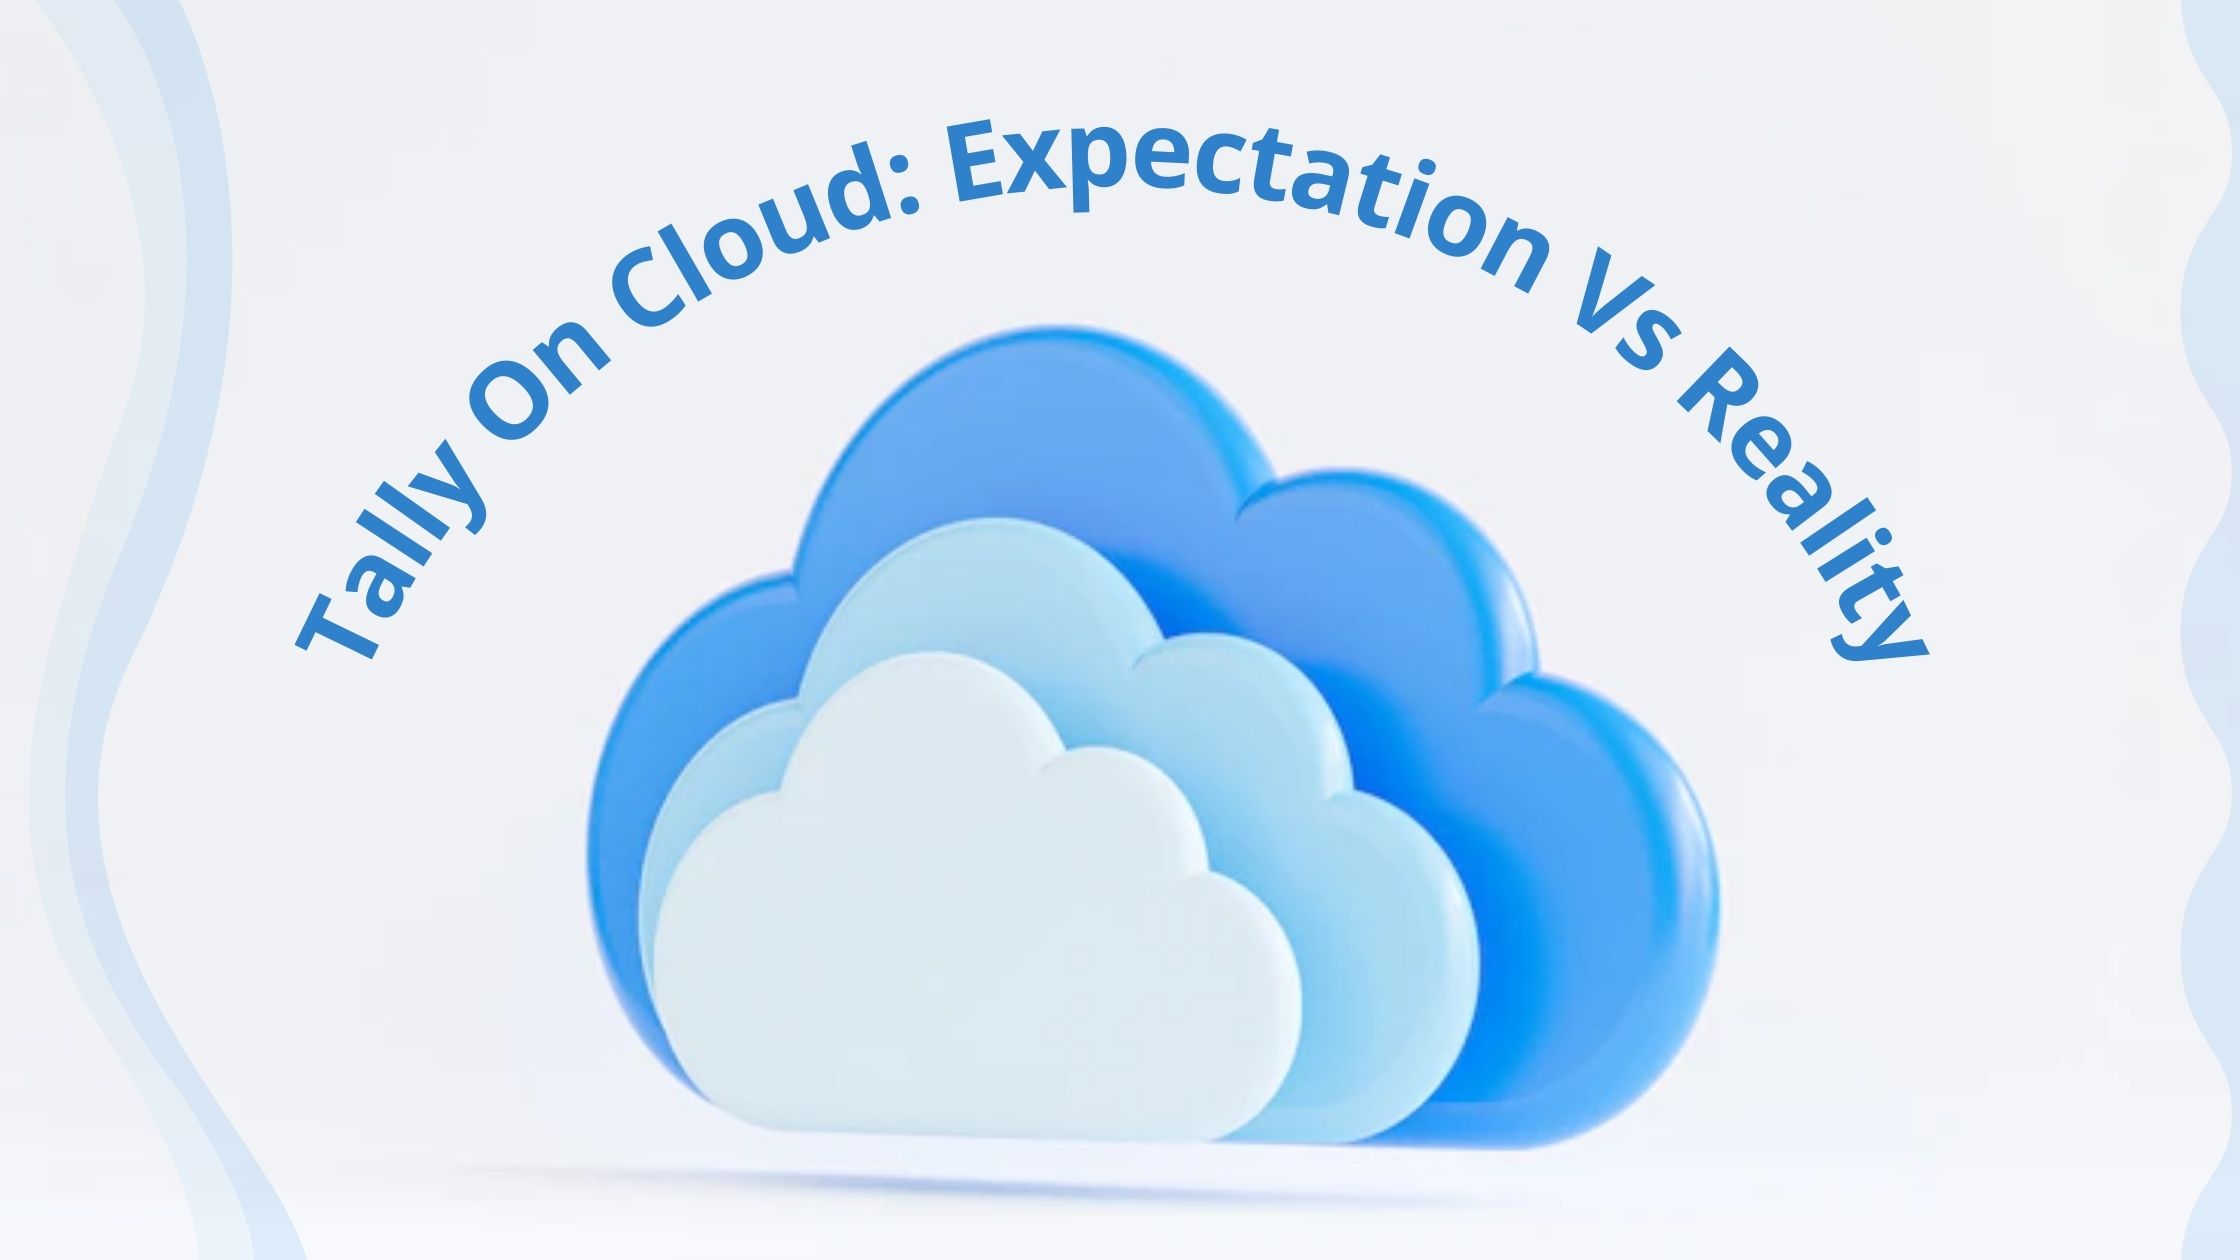 Tally on cloud expectations and reality